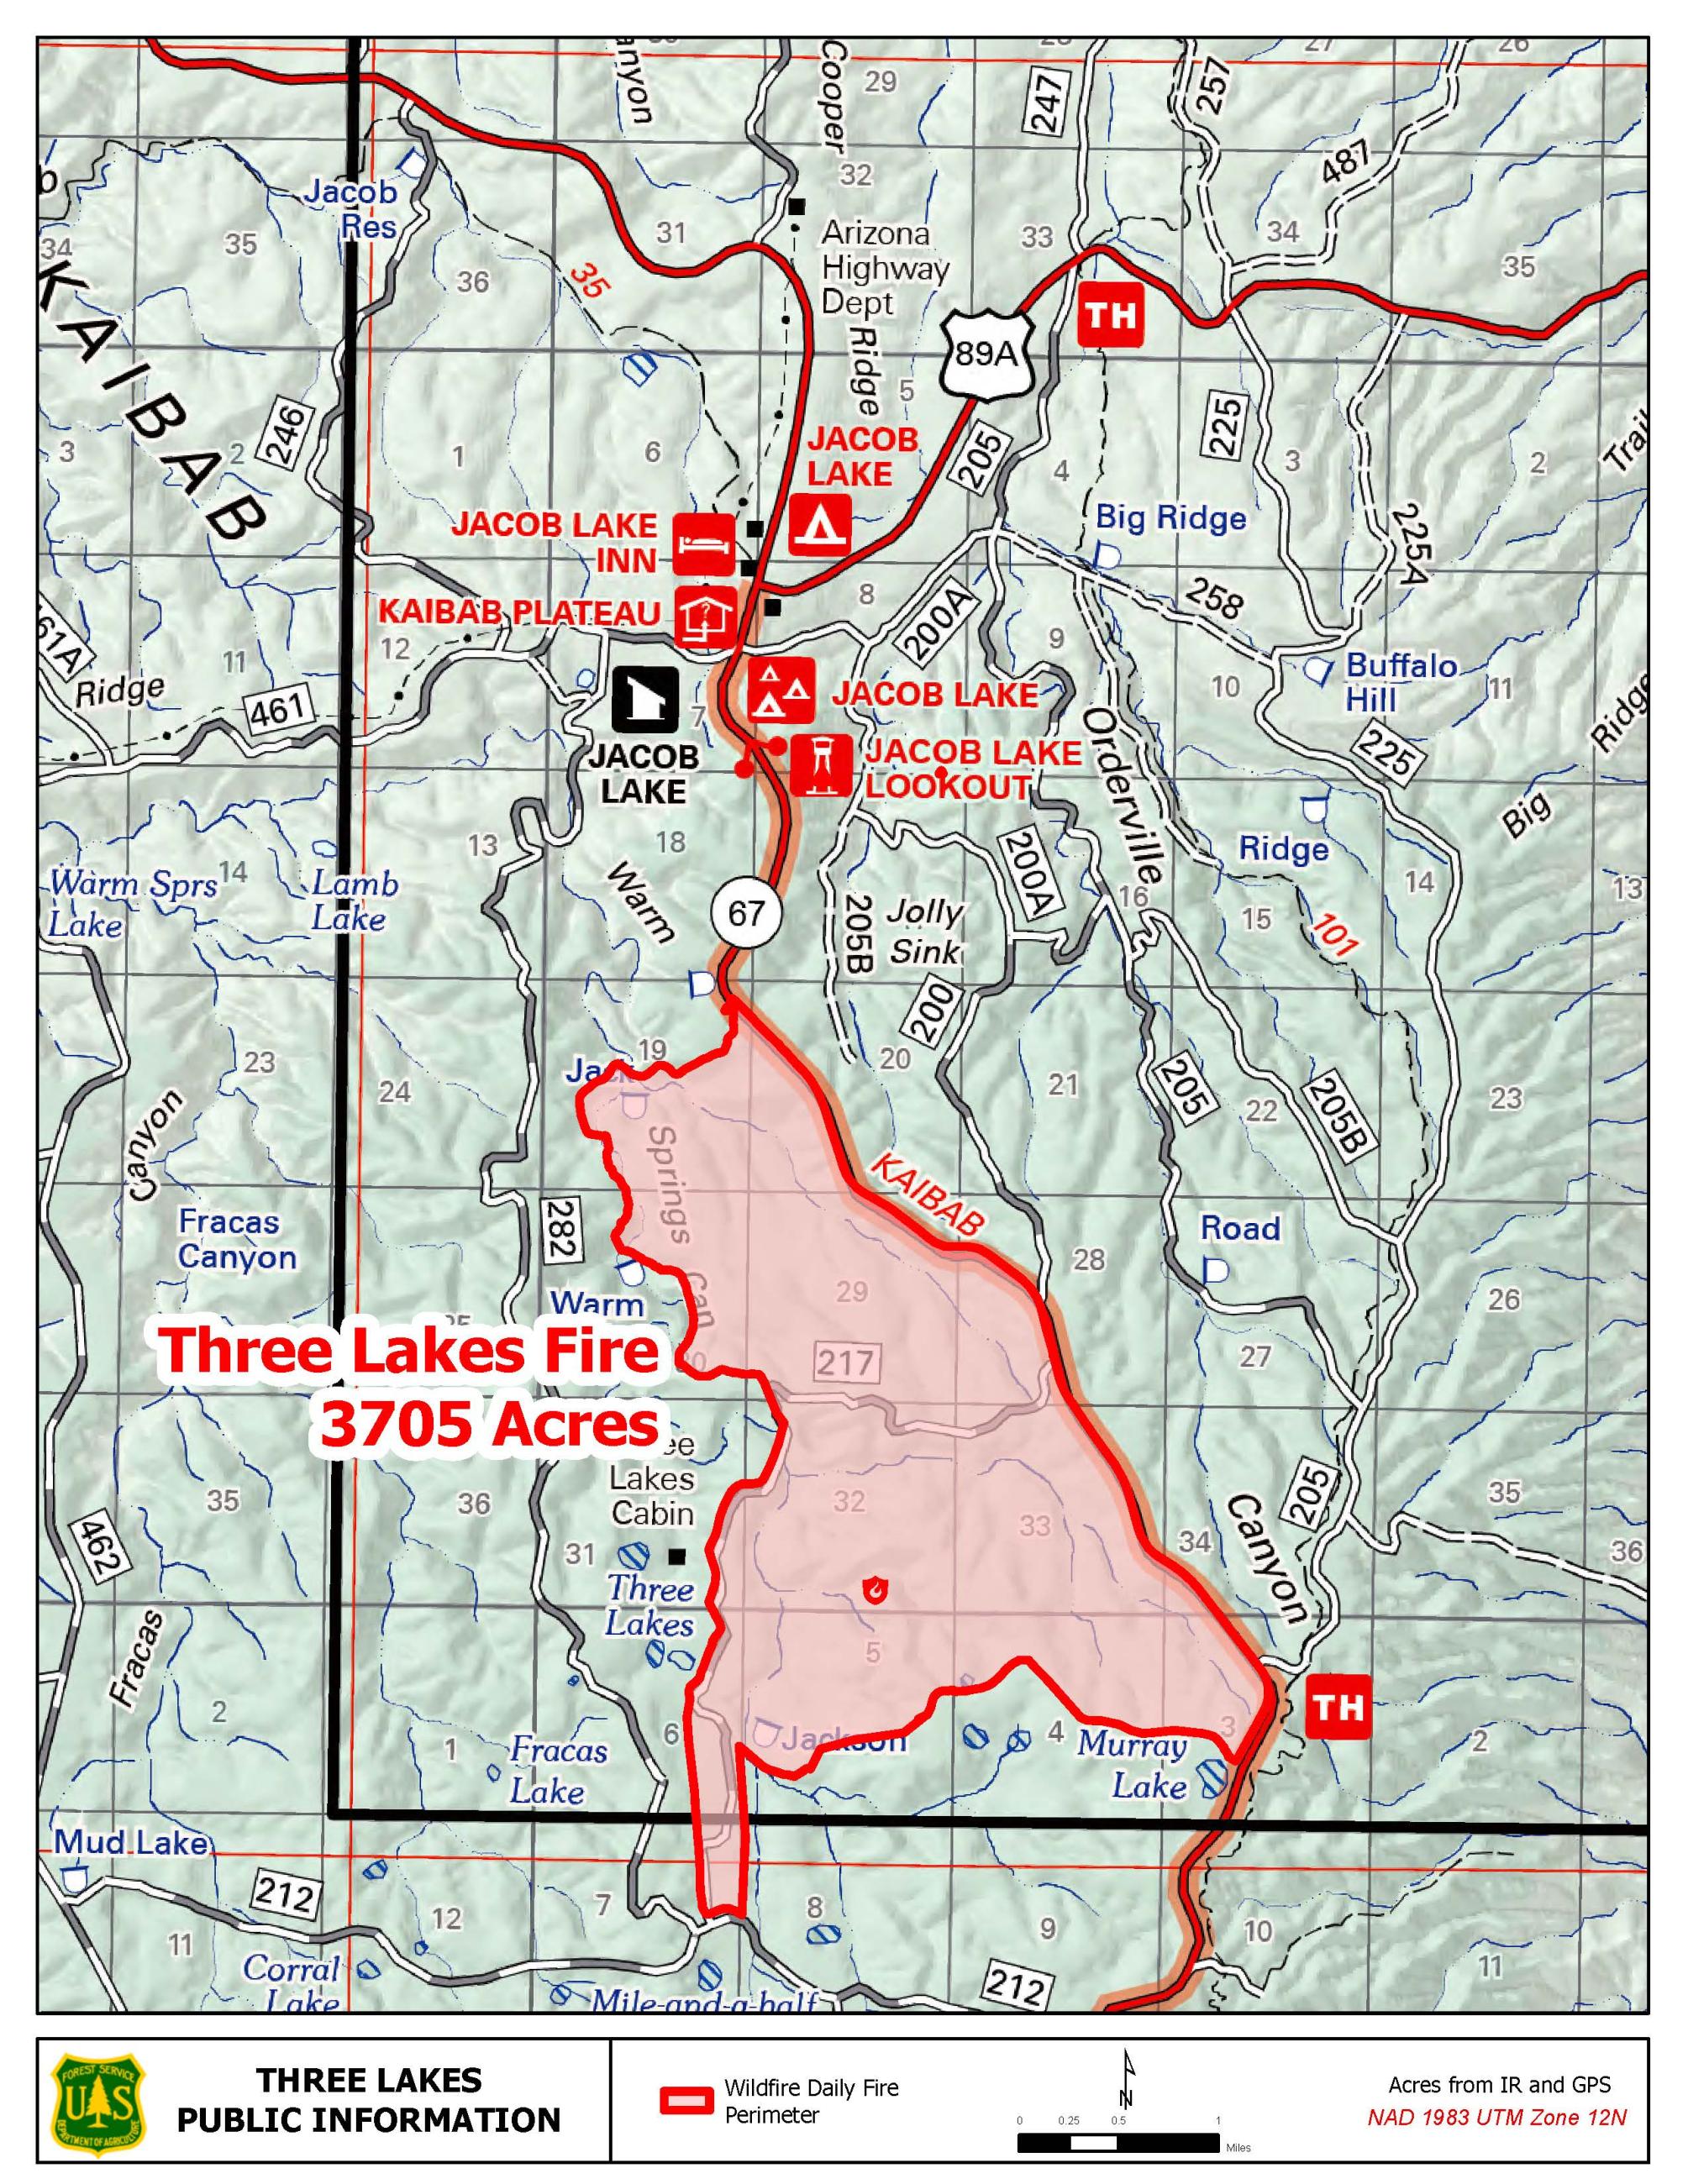 Map communicating the location of the Three Lakes Fire in relation to the Jacob Lake area.